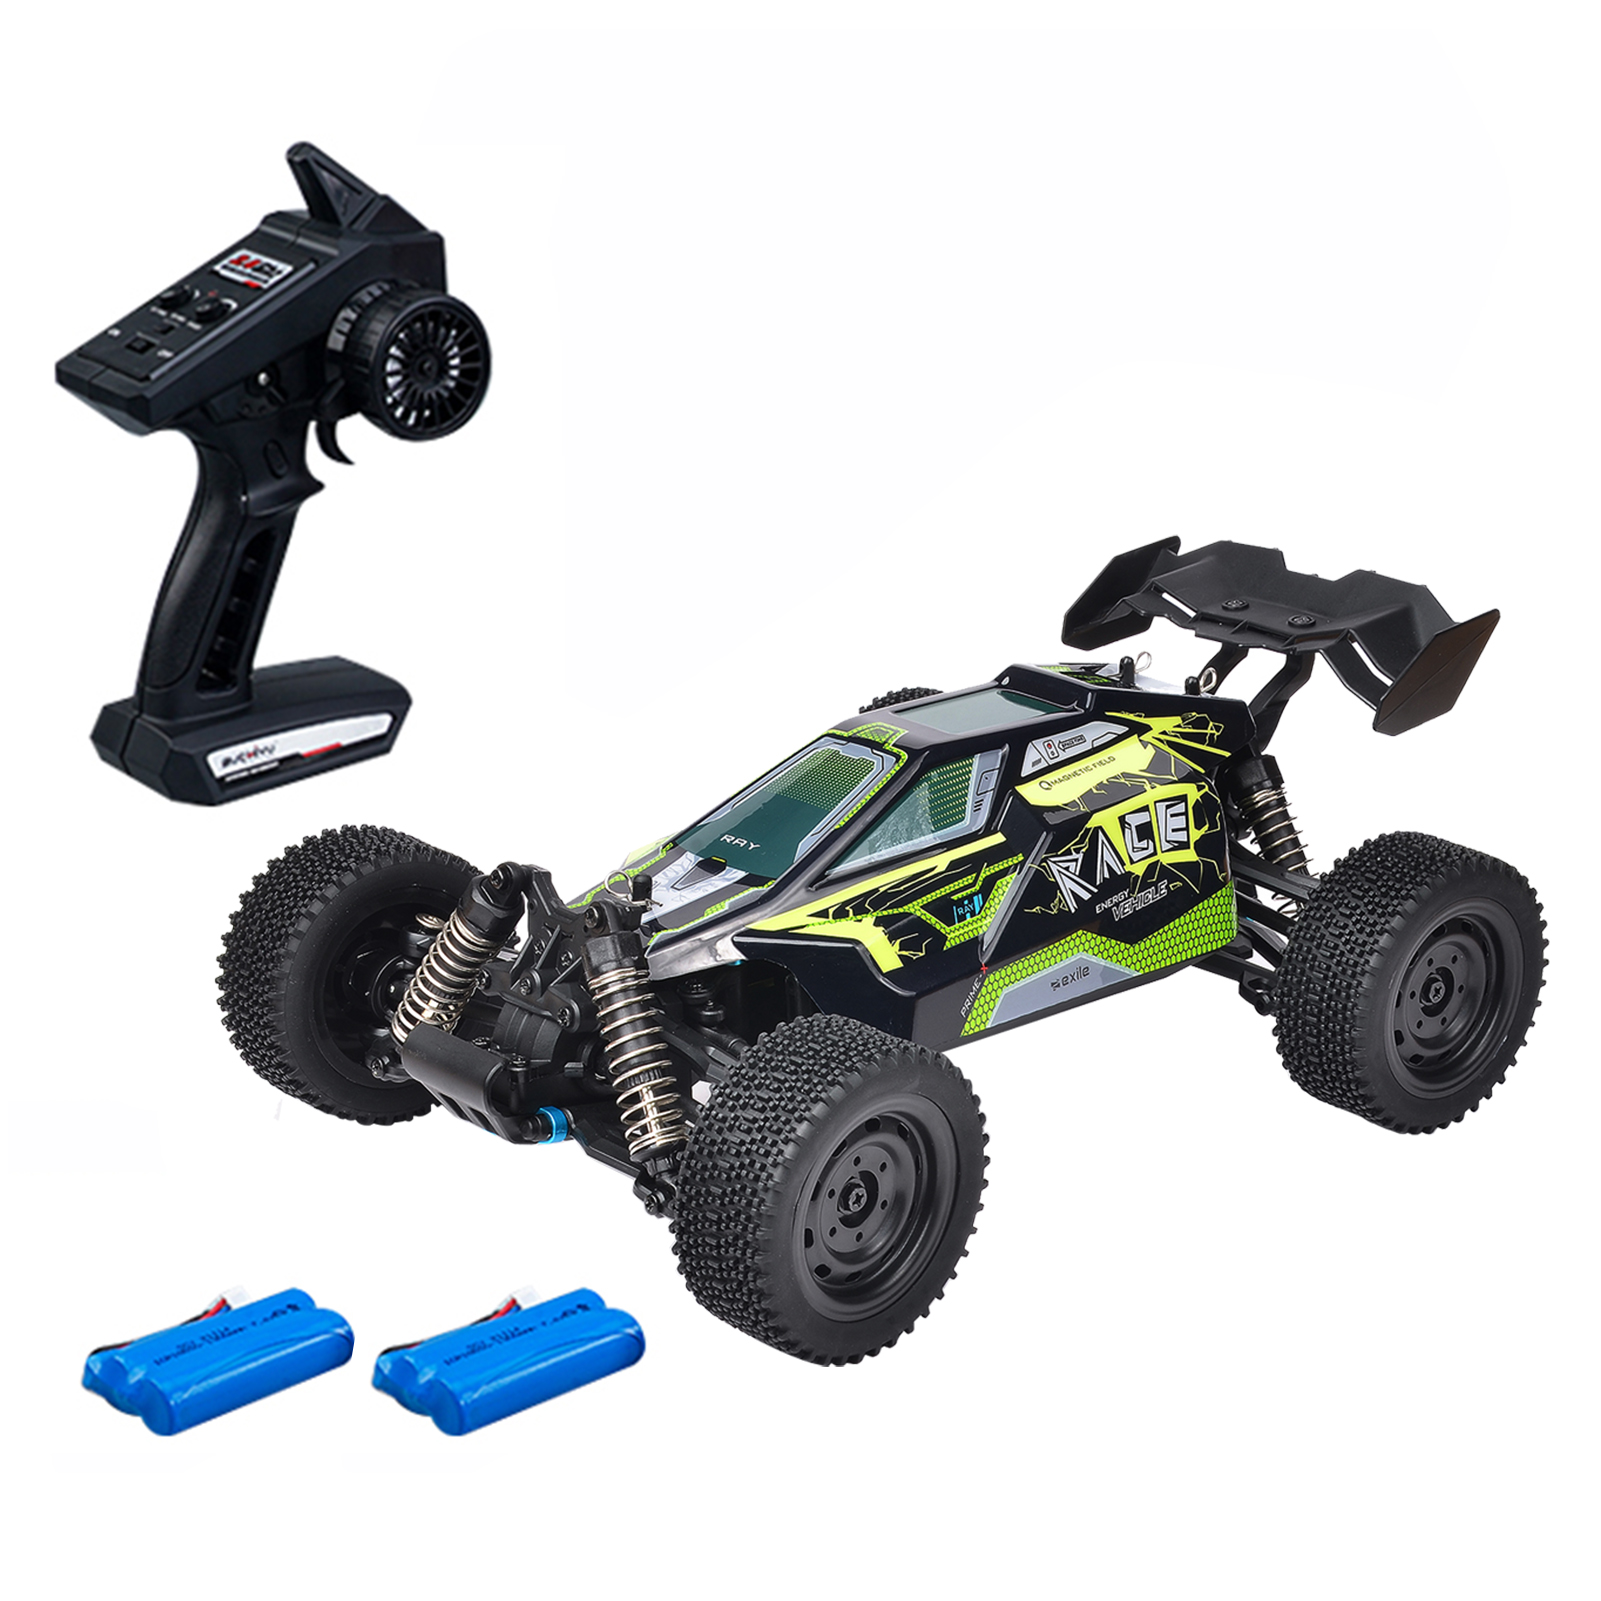 Off-Road Car  Truck  Car High Speed 35kmh 116 2.4GHz Racing Car 4WD  for Boys with 2 Battery - image 1 of 7